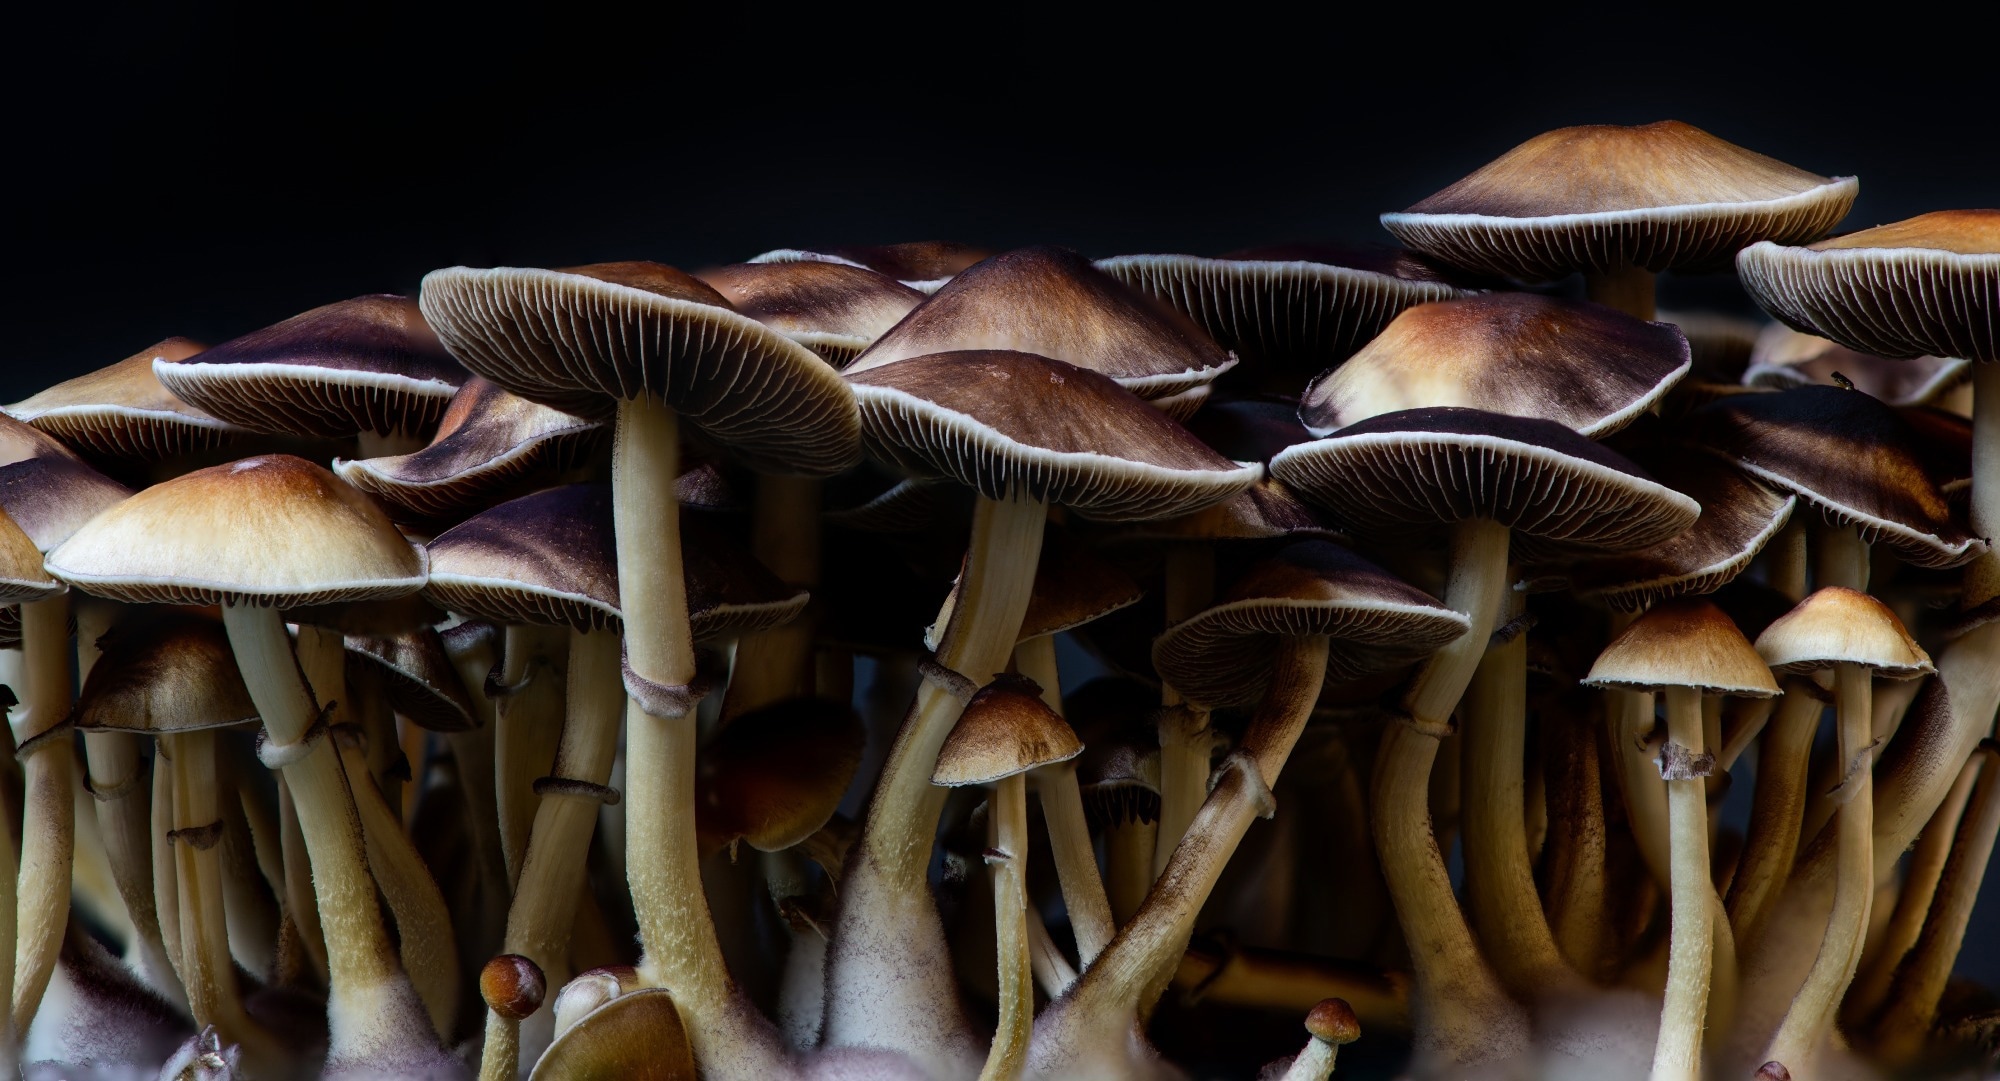 Mushrooms - A Biodegradable Solution for a Green Electronic Future.